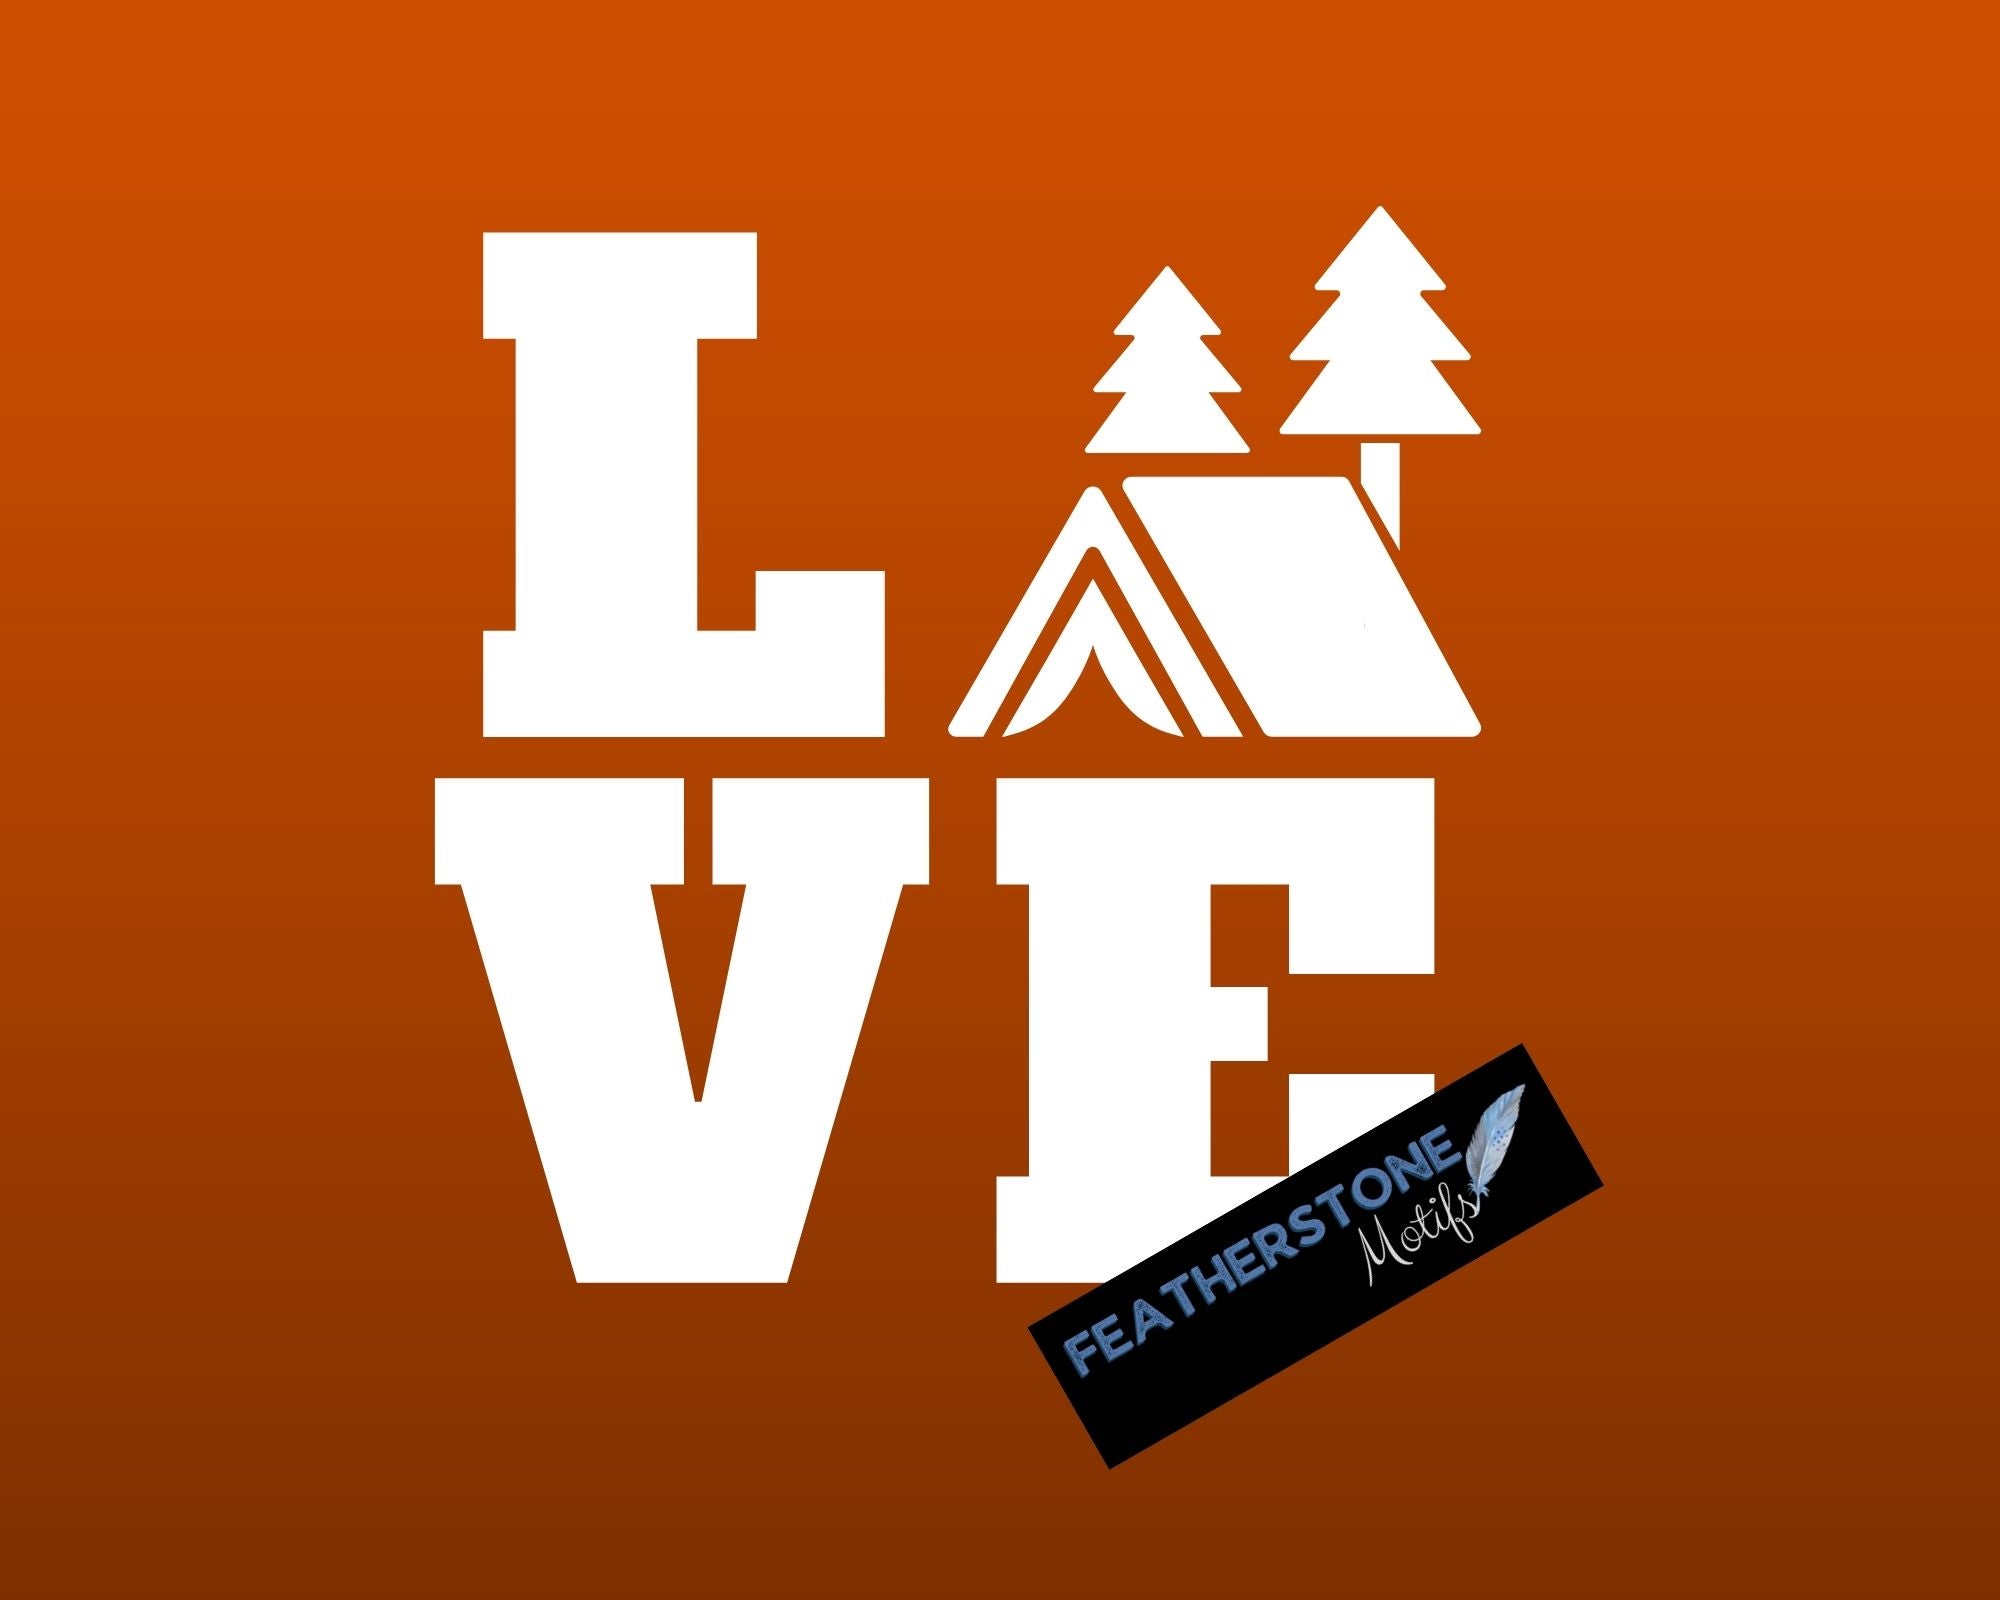 Love camping? Then show it with this camping themed love square vinyl decal! Available in 4 sizes and 10 colors, these vinyl decals make great gifts for everyone. This image shows the Camping Love Square vinyl decal on a copper background.